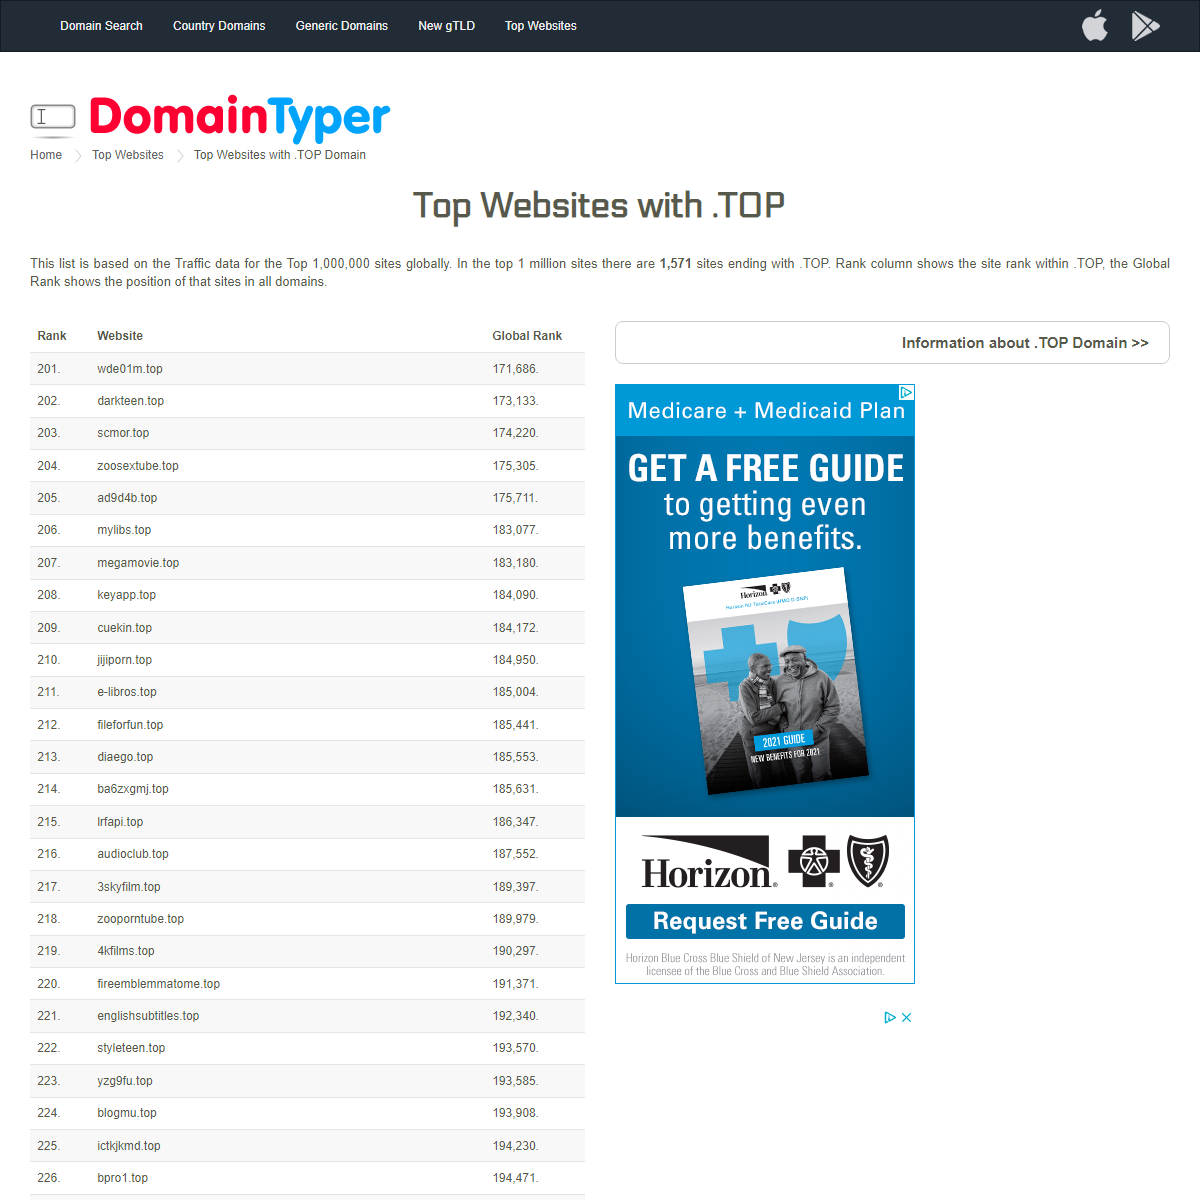 A complete backup of https://domaintyper.com/top-websites/most-popular-websites-with-TOP-domain/page/3